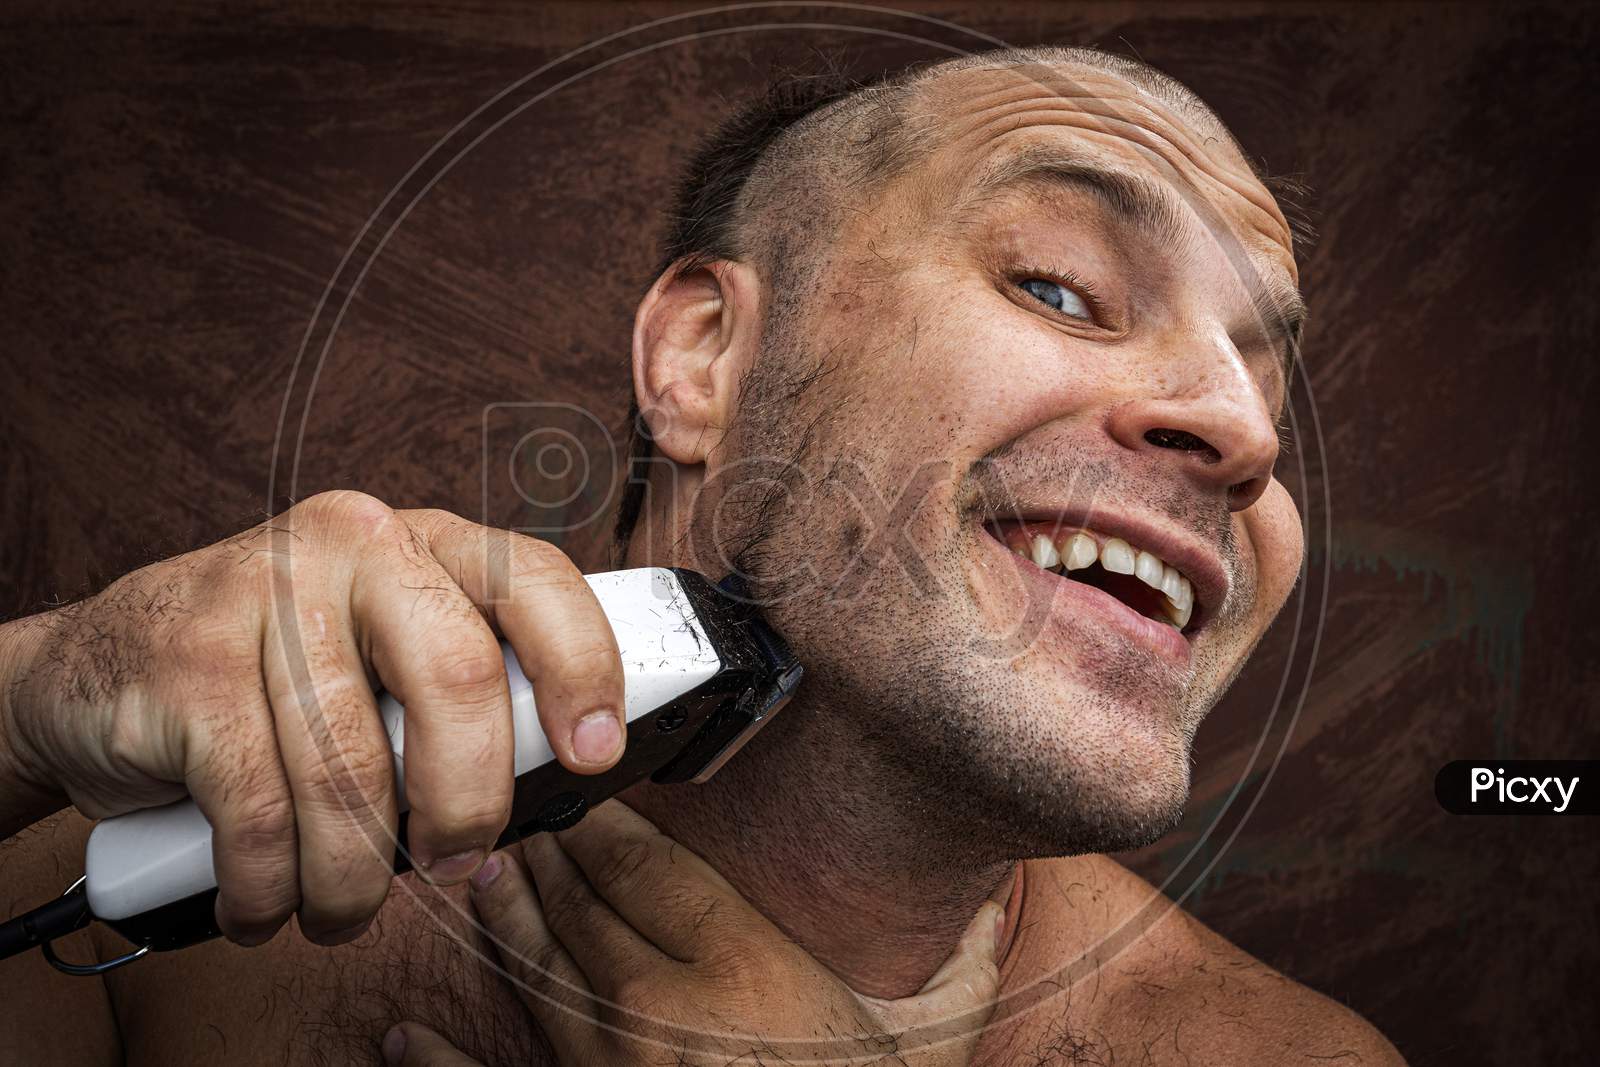 Adult Cheerful Man With A Beard Shaves His Beard At Home. The Guy Looks In The Bathroom Mirror And Uses The Electric Trimmer. Front View